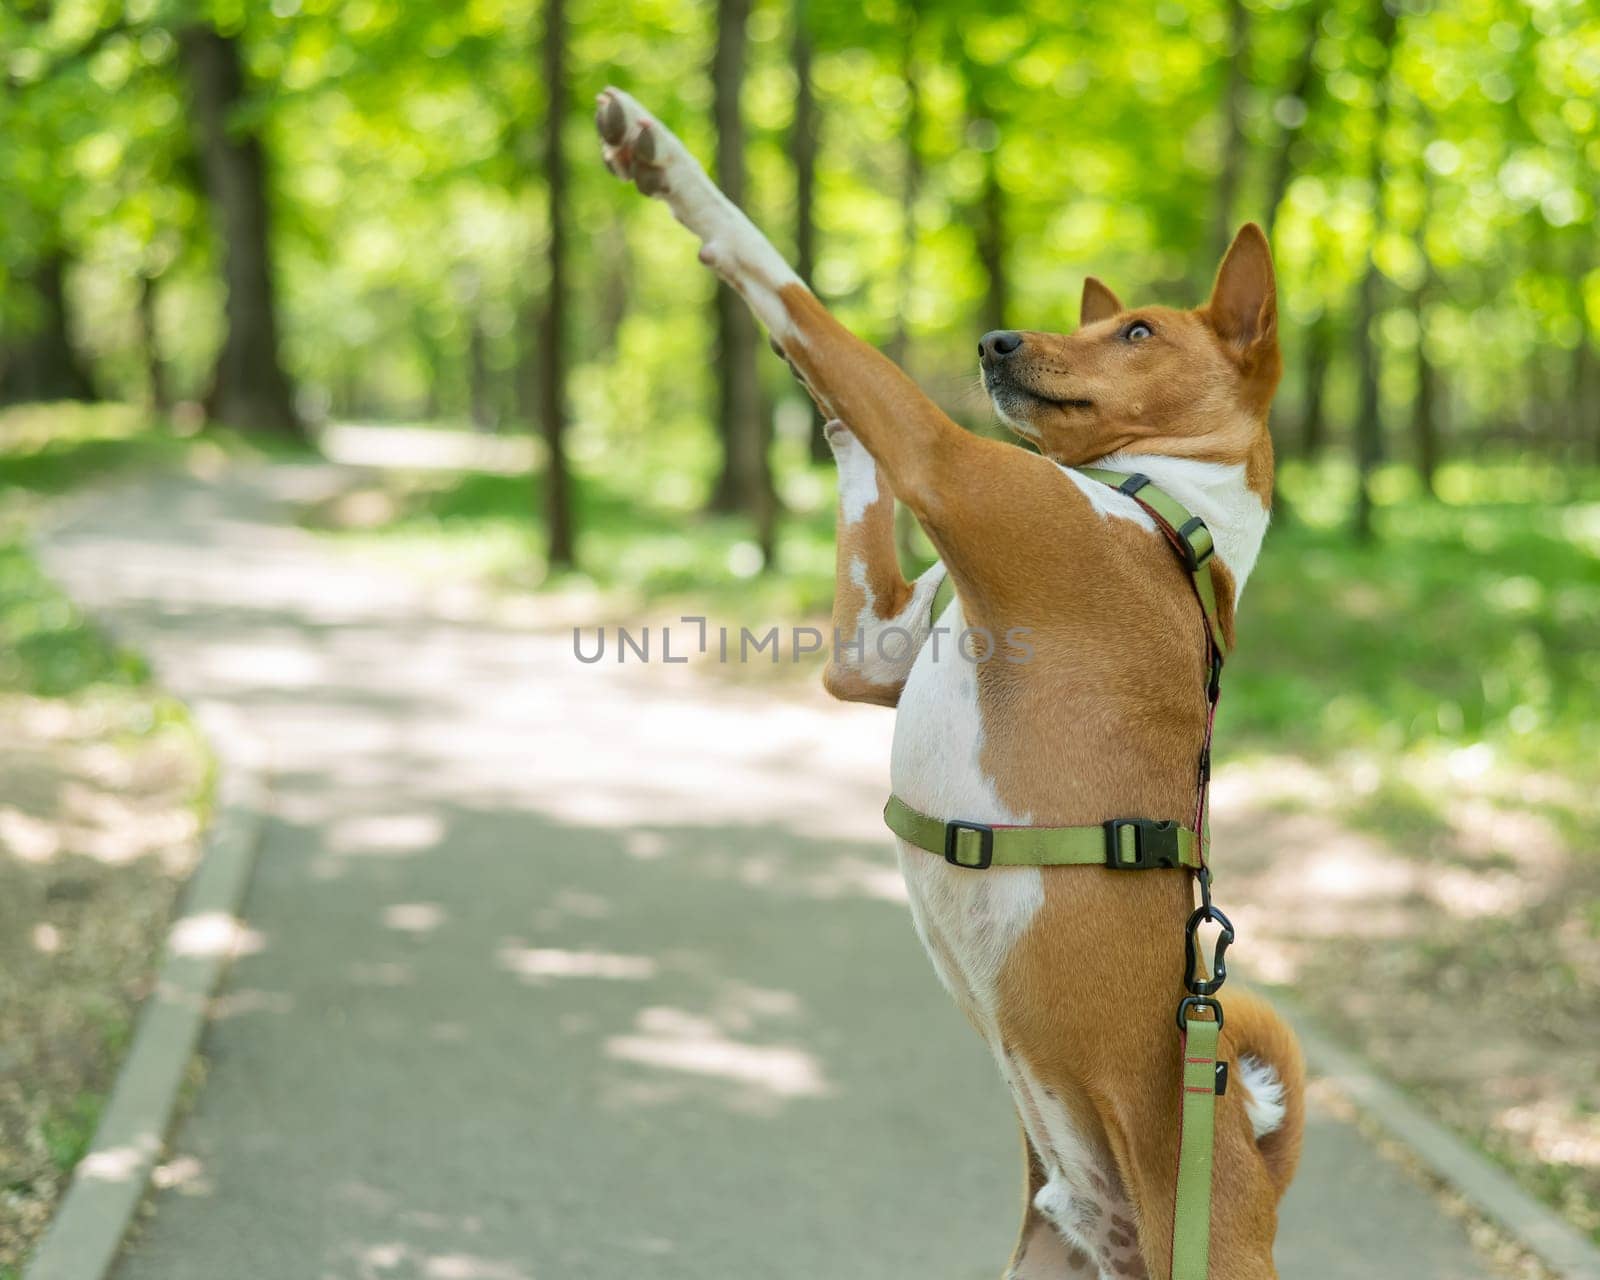 African barking basenji dog on hind legs in the park. by mrwed54